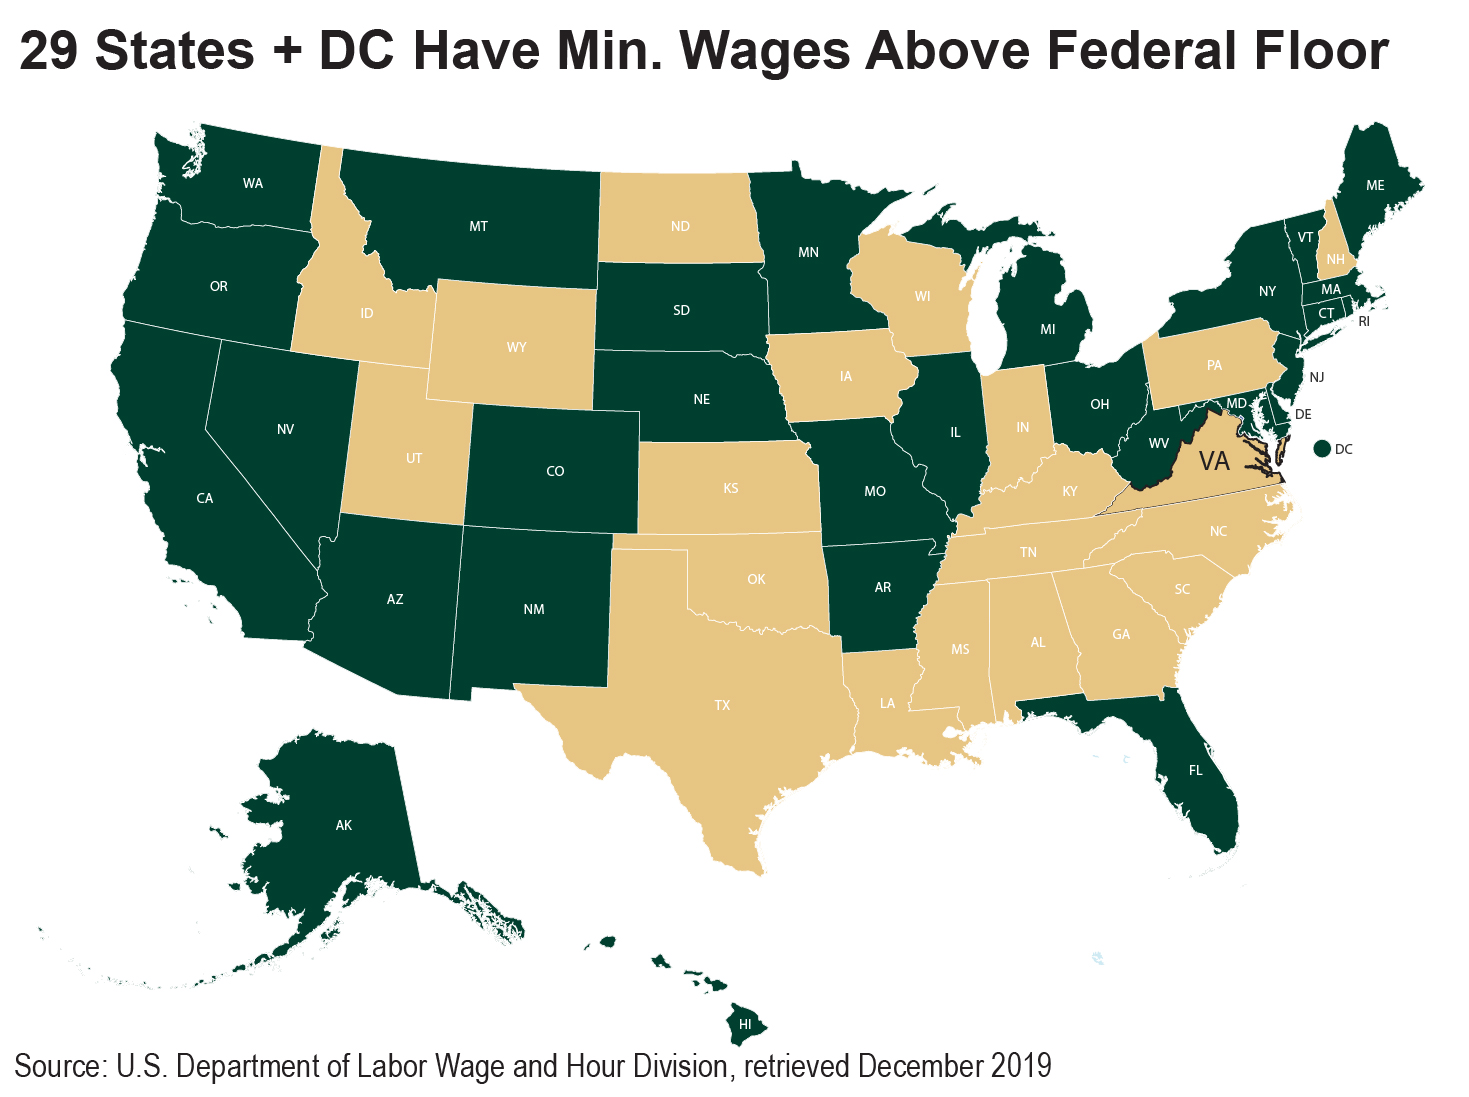 Map showing the 29 states along with D.C that have minimum wages above the federal floor